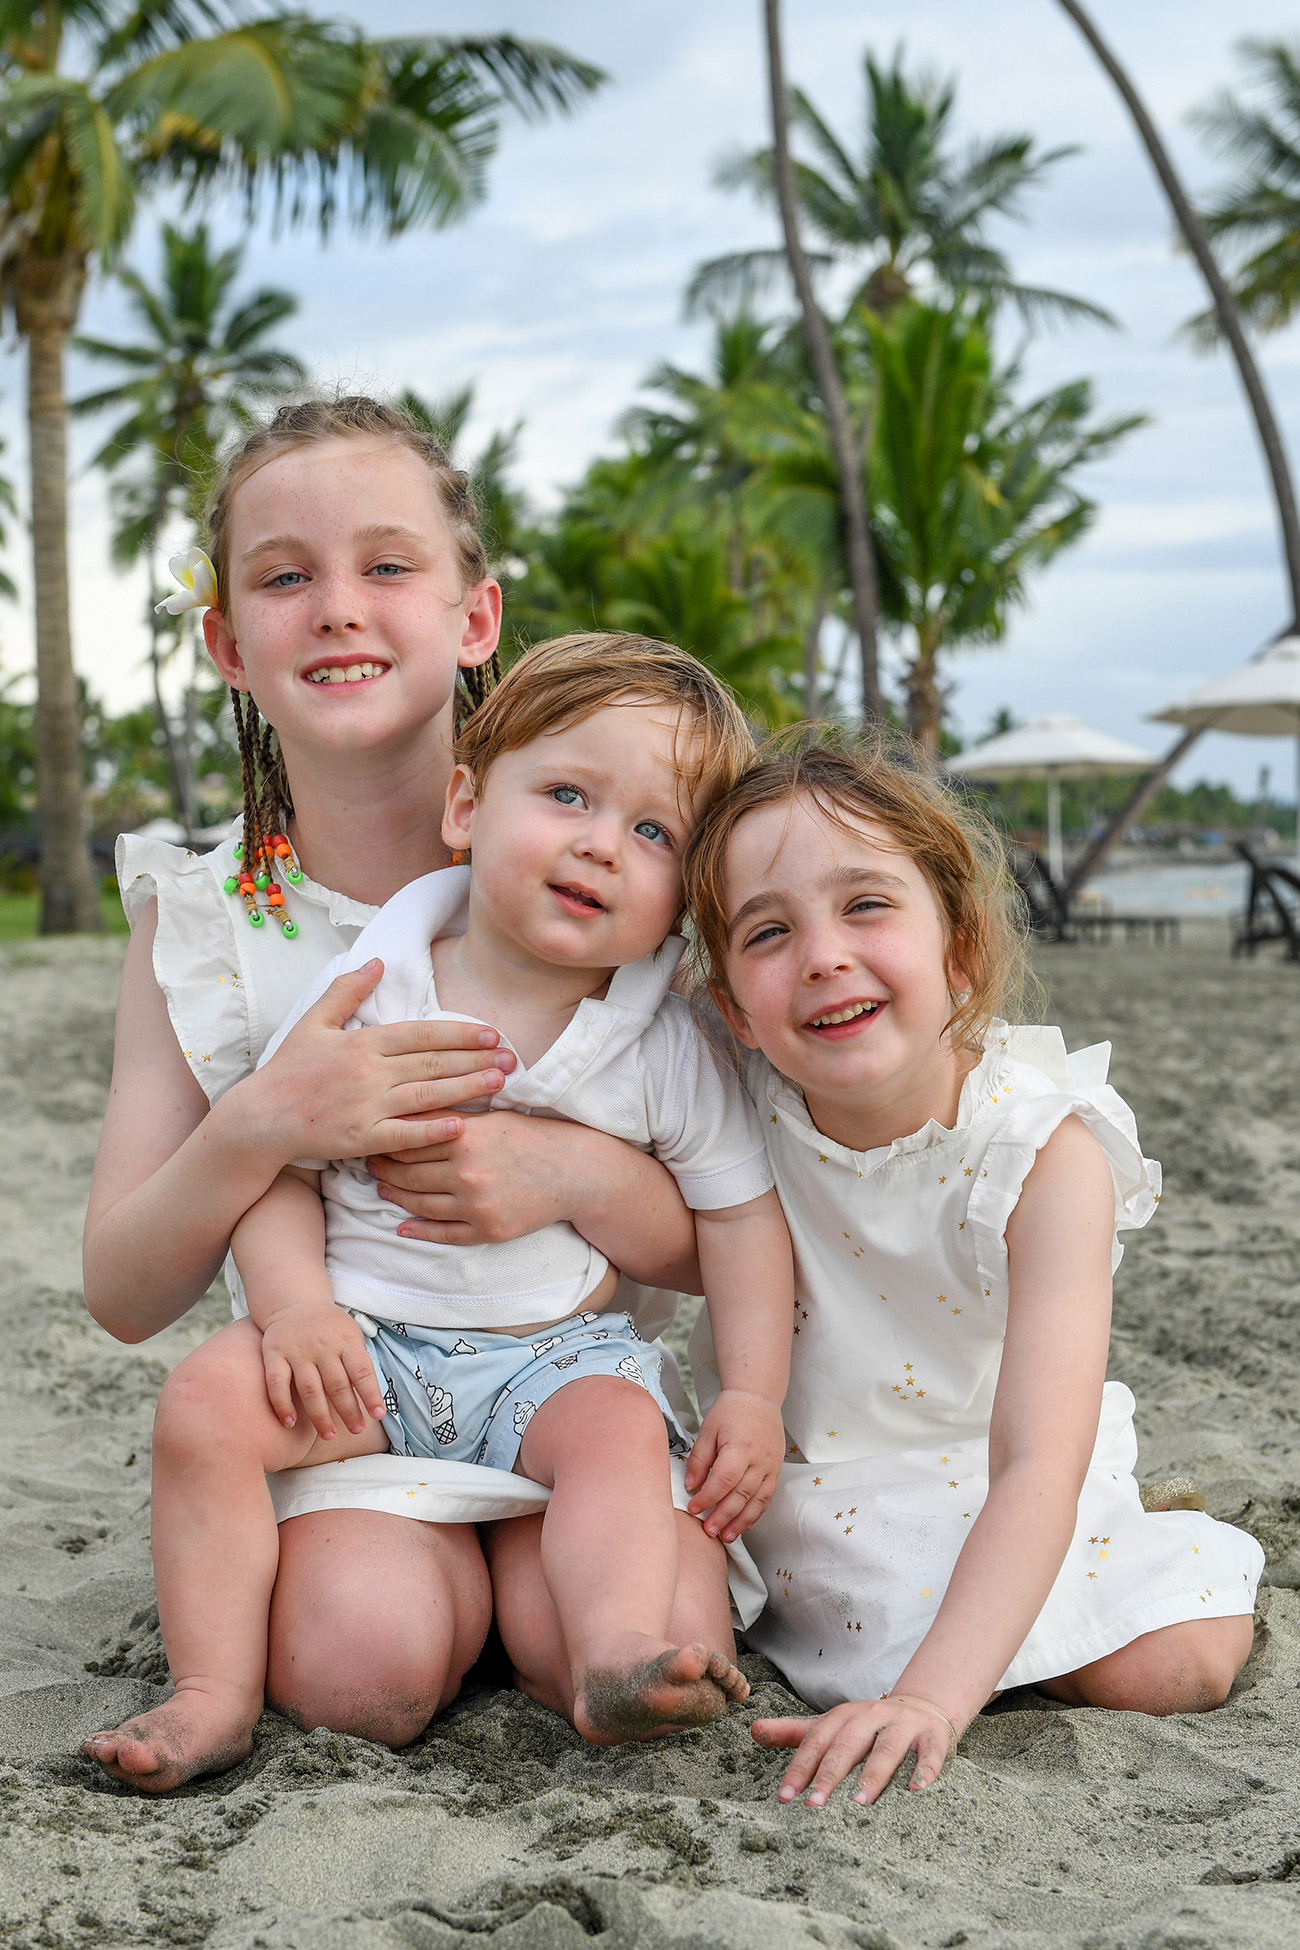 Sister, sister and brother in white cuddle against palm trees